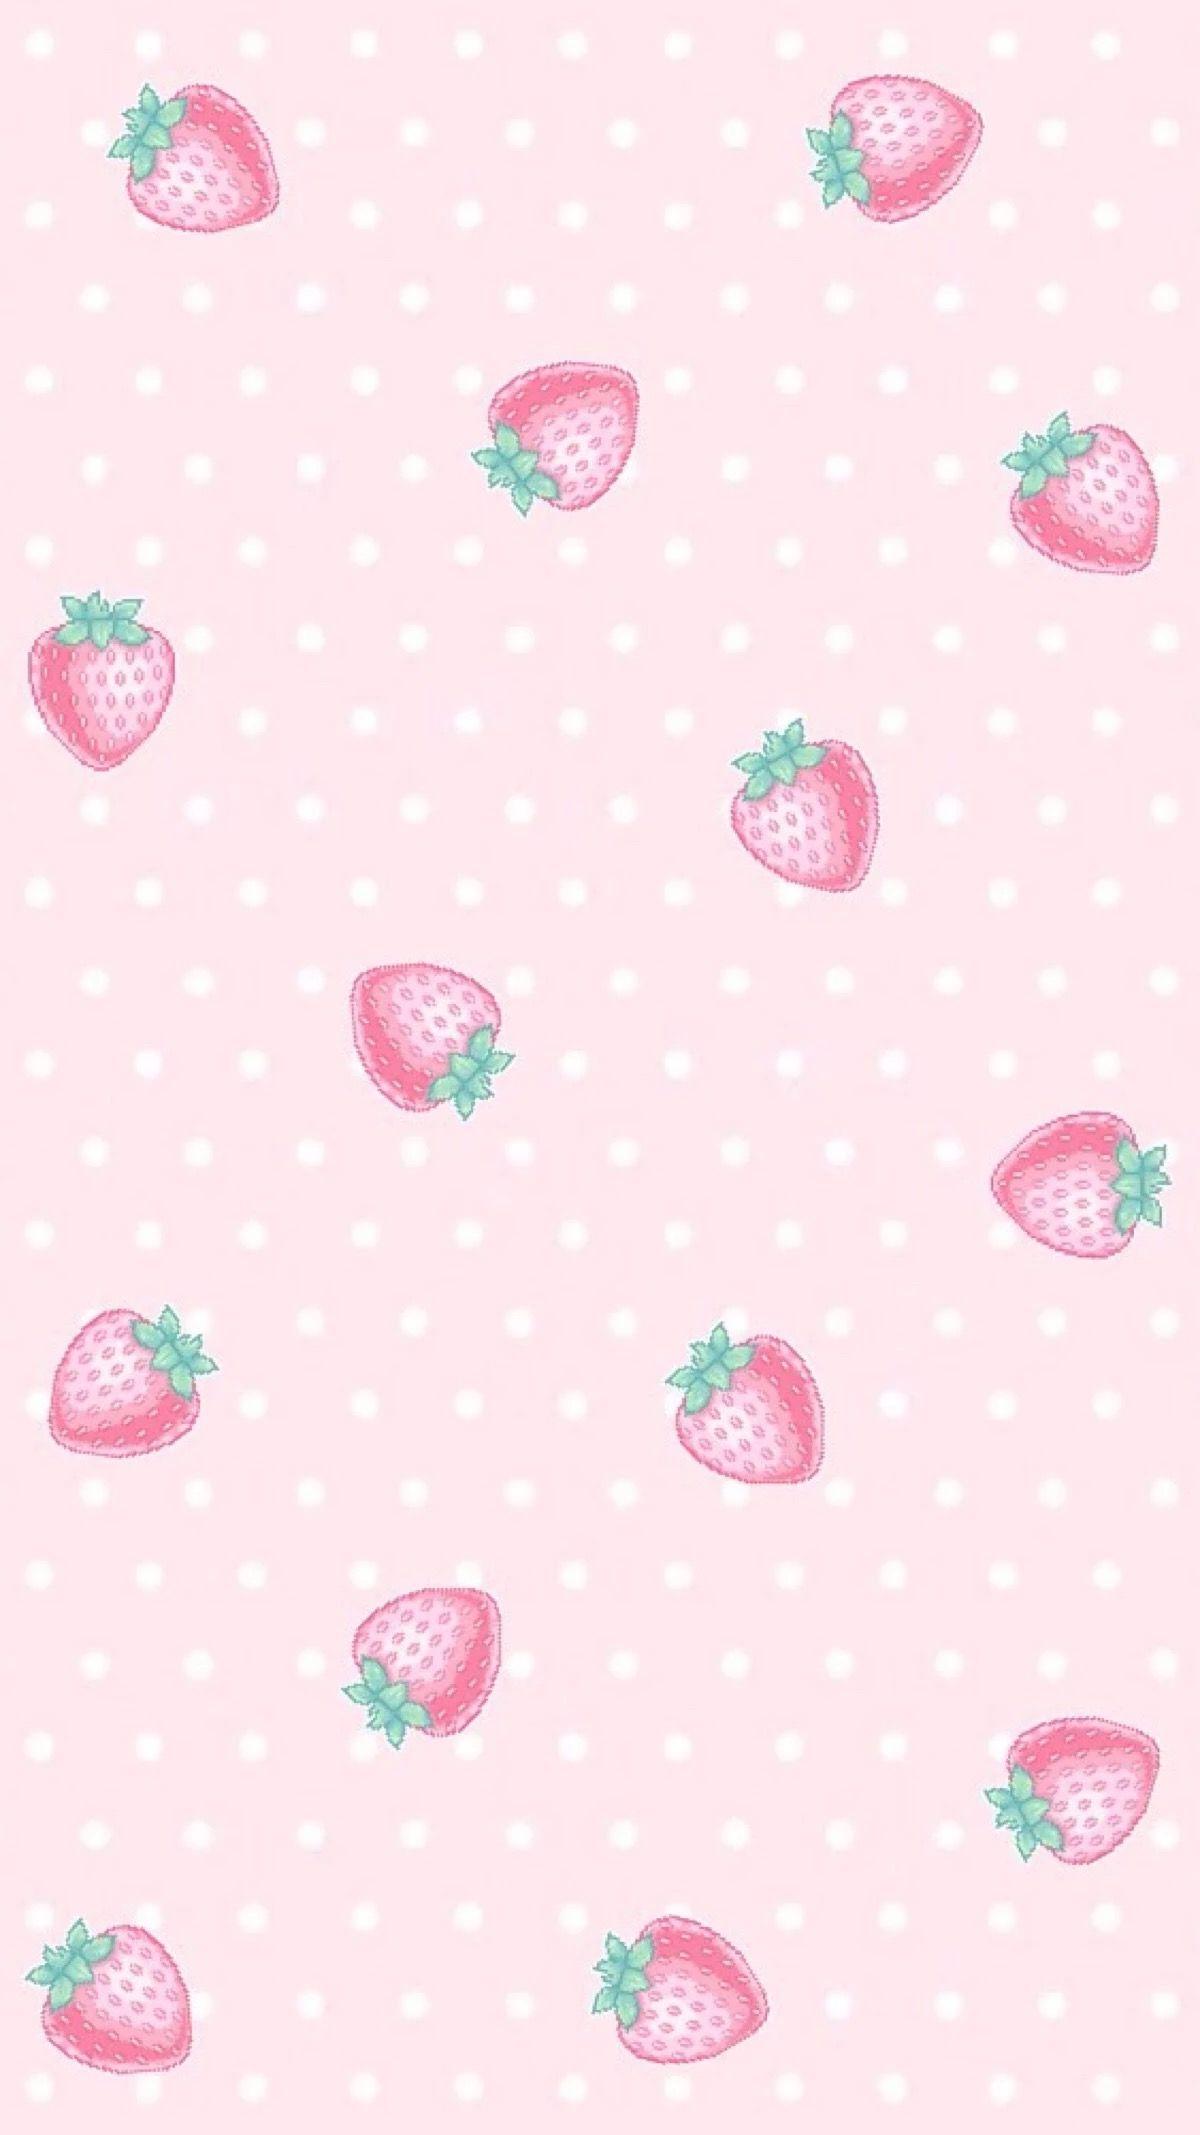 Strawberry Pattern Fruit Illustration On Pink Background Good For  Wallpaper Royalty Free SVG Cliparts Vectors And Stock Illustration  Image 114947056